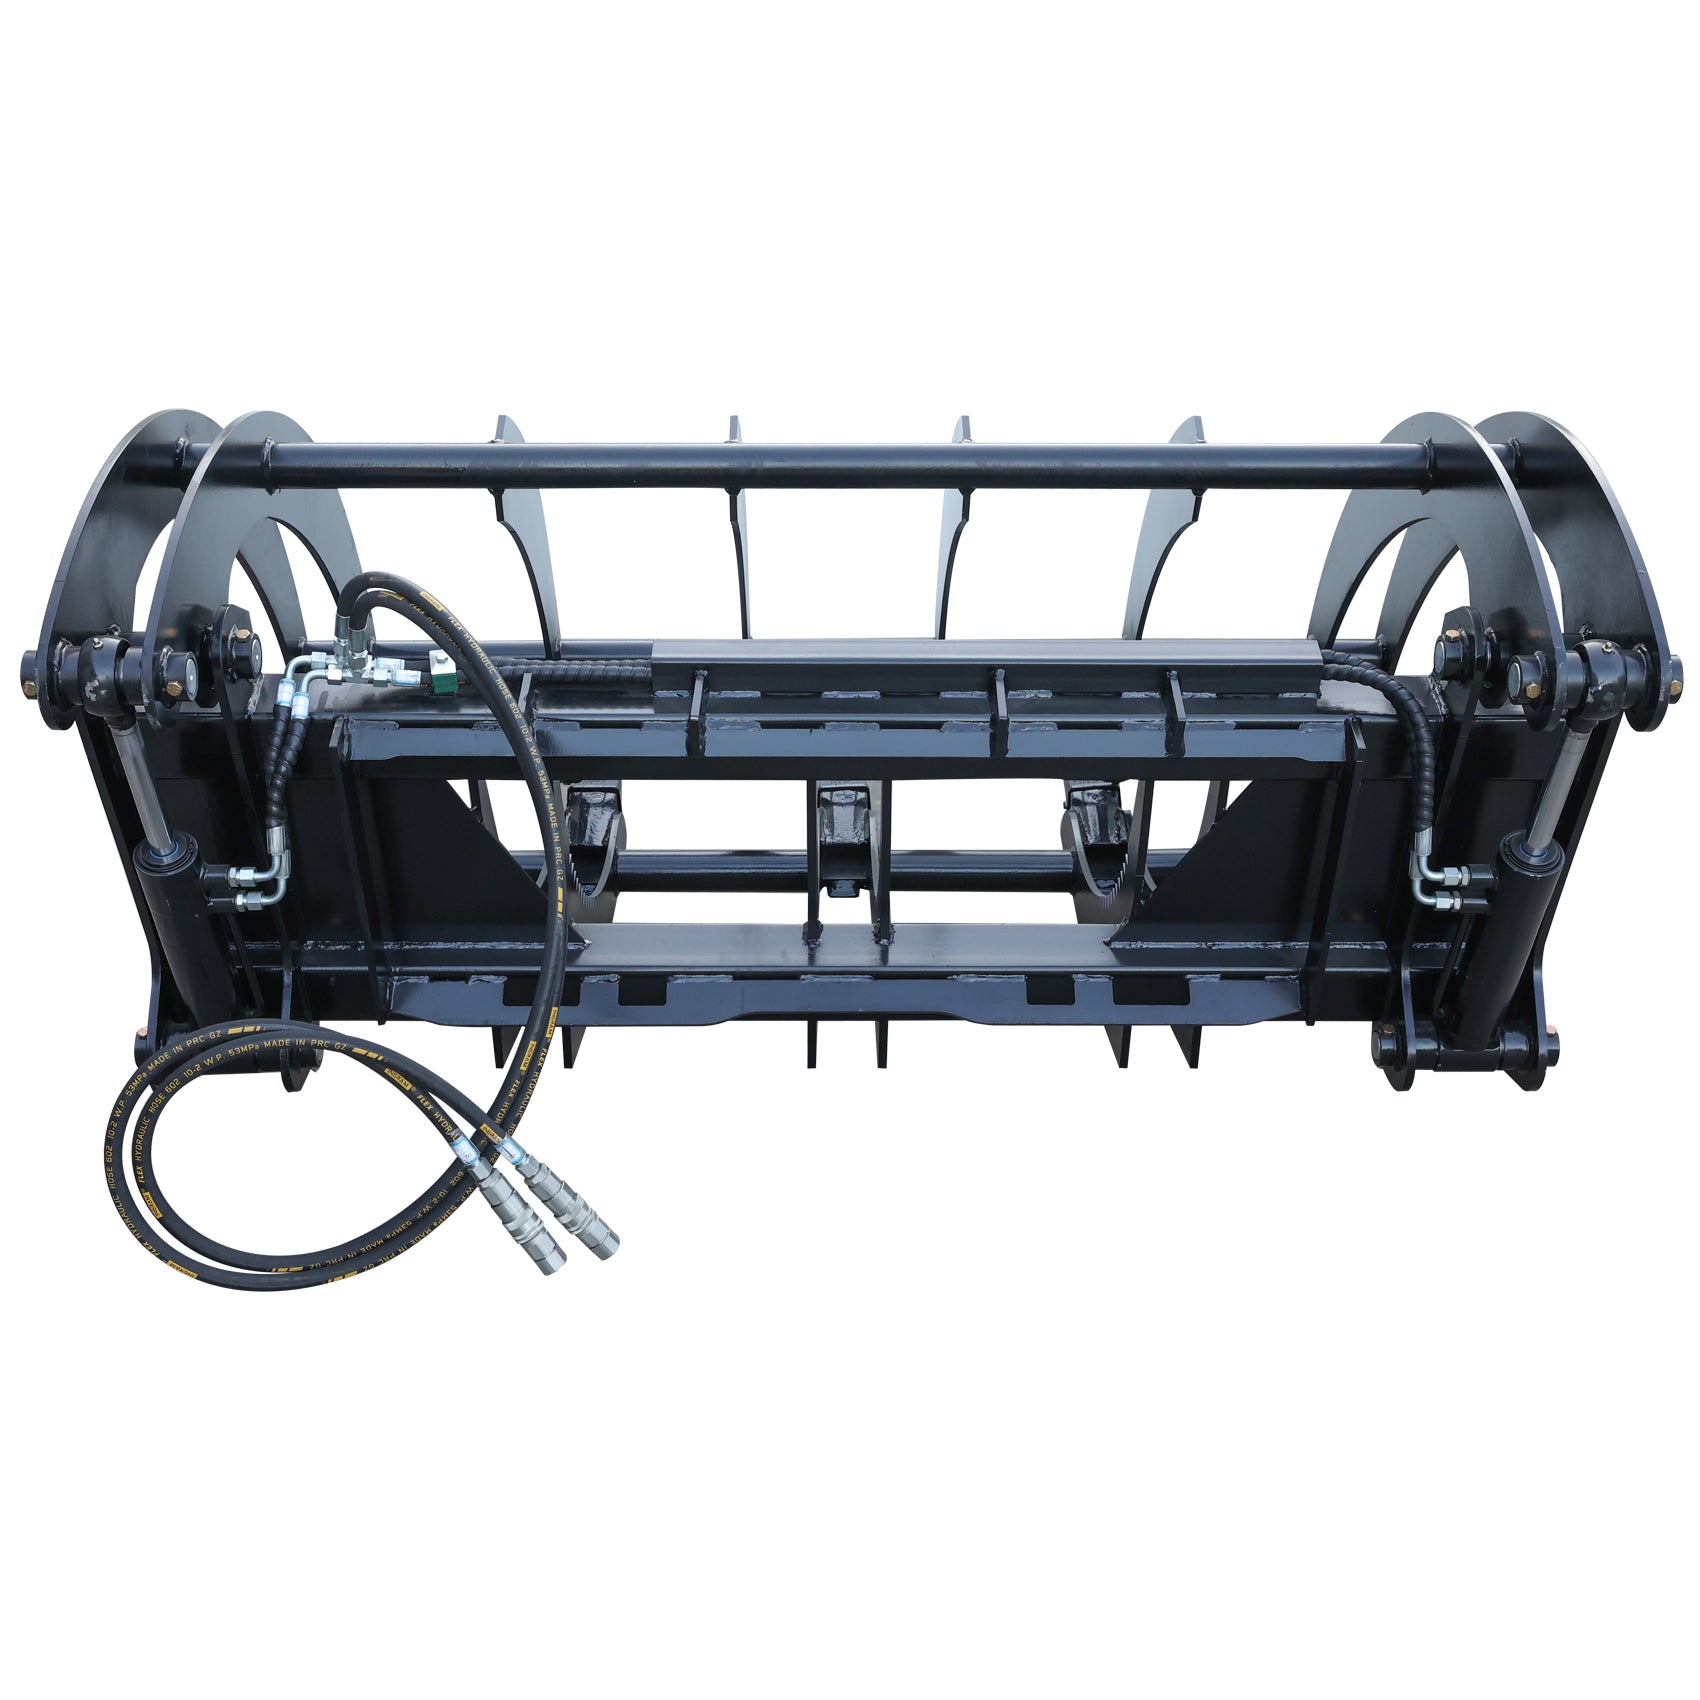 Landy Attachments 72'' Extreme Skid Steer Root Grapple Rake Universal Mount - 0